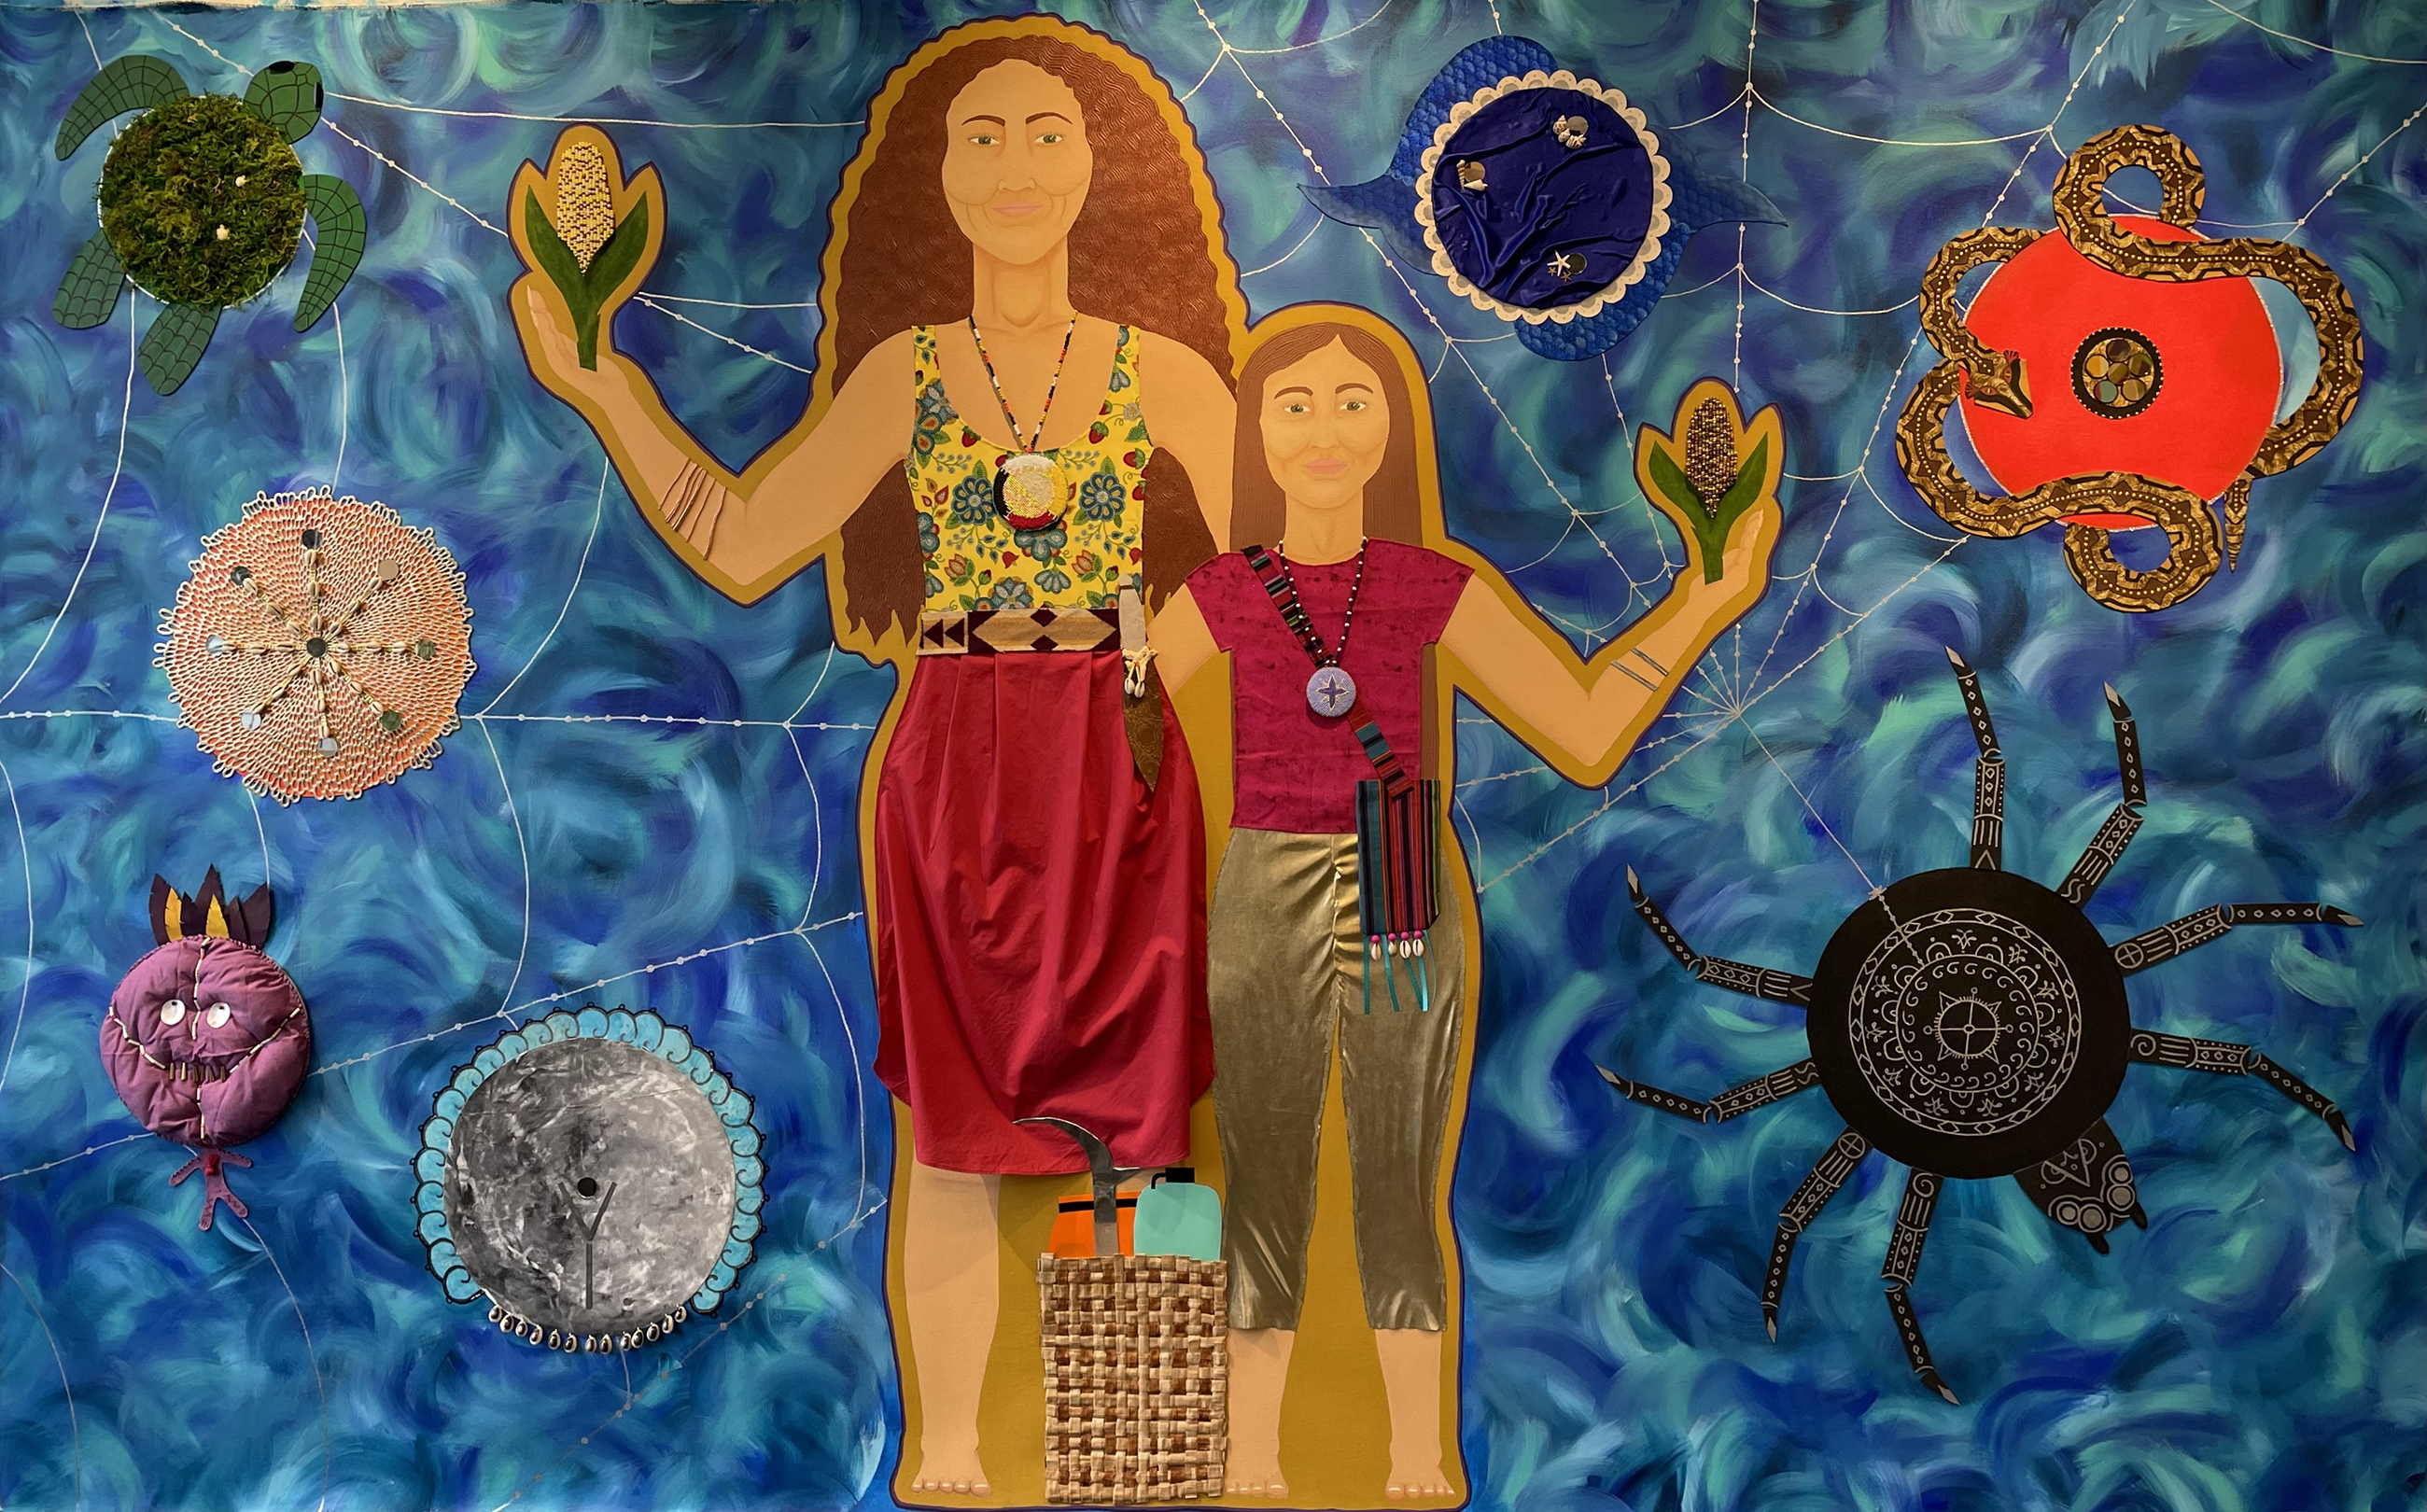 Mixed media artwork with two female figures side-by-side alongside a snake, a turtle, a spider and its web, and other objects layered upon a blue wavelike background.